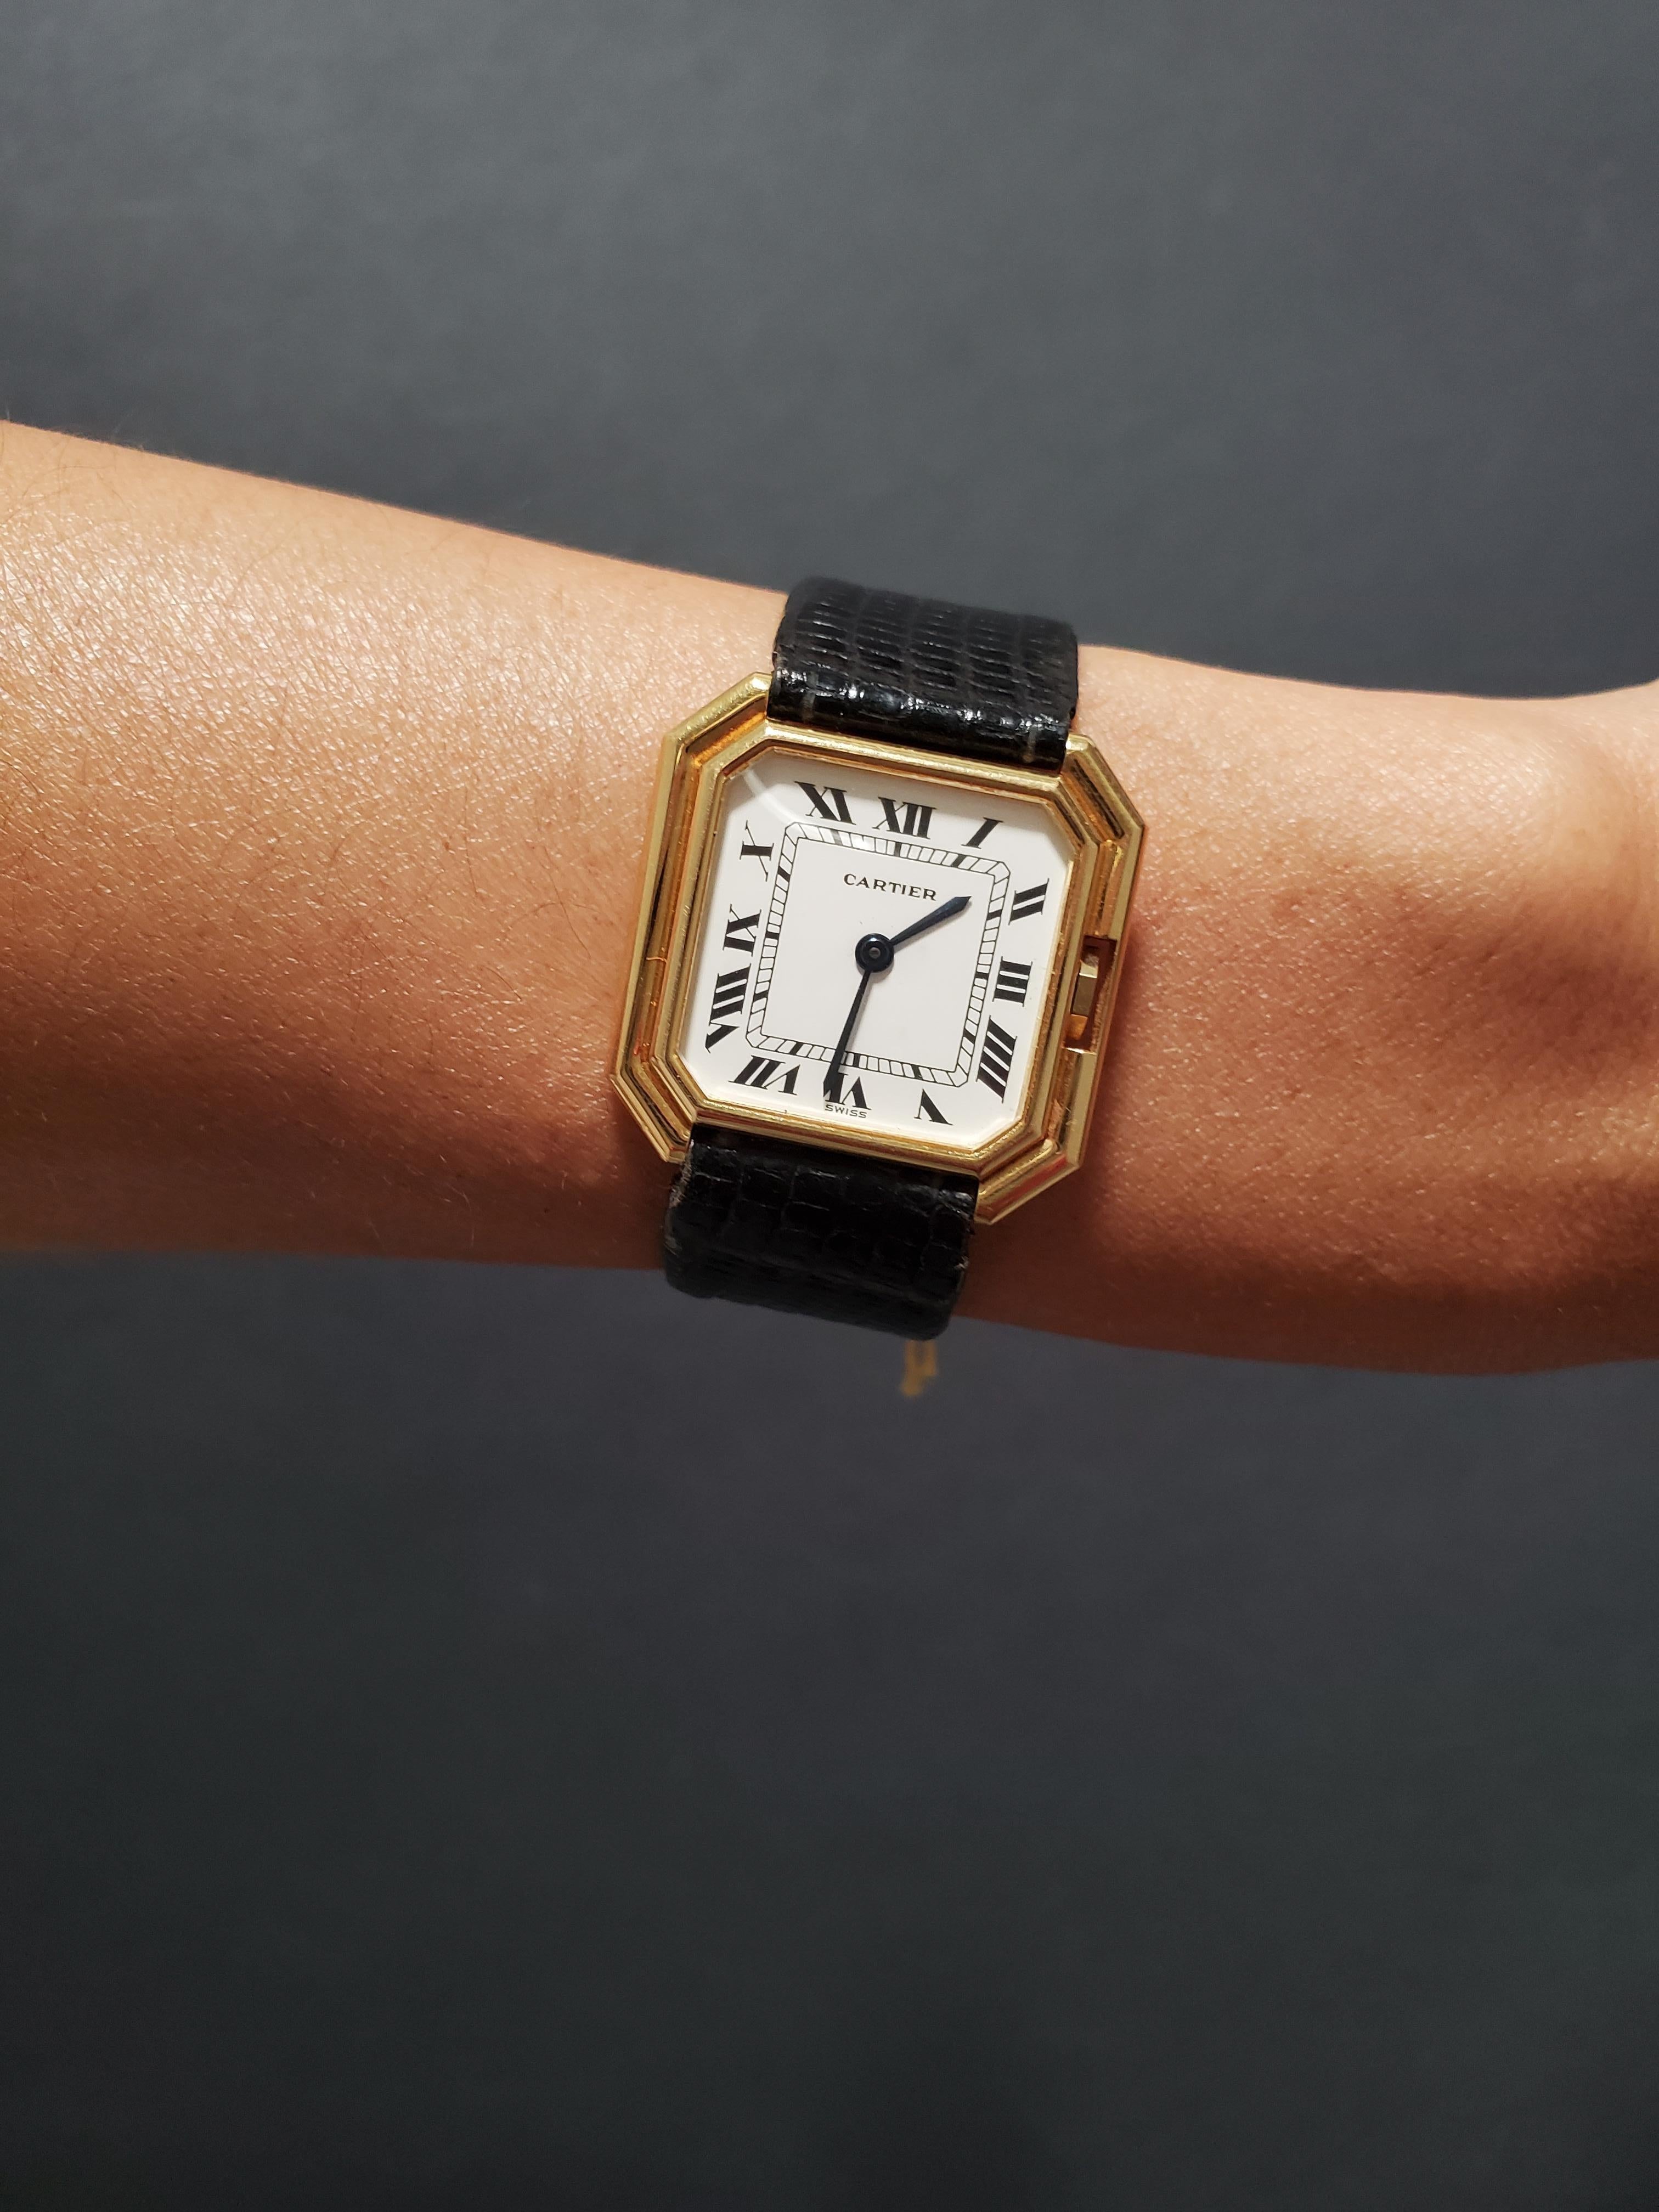 Introduction:
This Vintage Cartier Paris Centure Octagon Shape watch is the medium size, circa 1975-1980.  It is made in 18K yellow gold and measures 28 x 28 mm with a mechanical manual wind 17-jewel movement.  It has the  black lizard strap with 